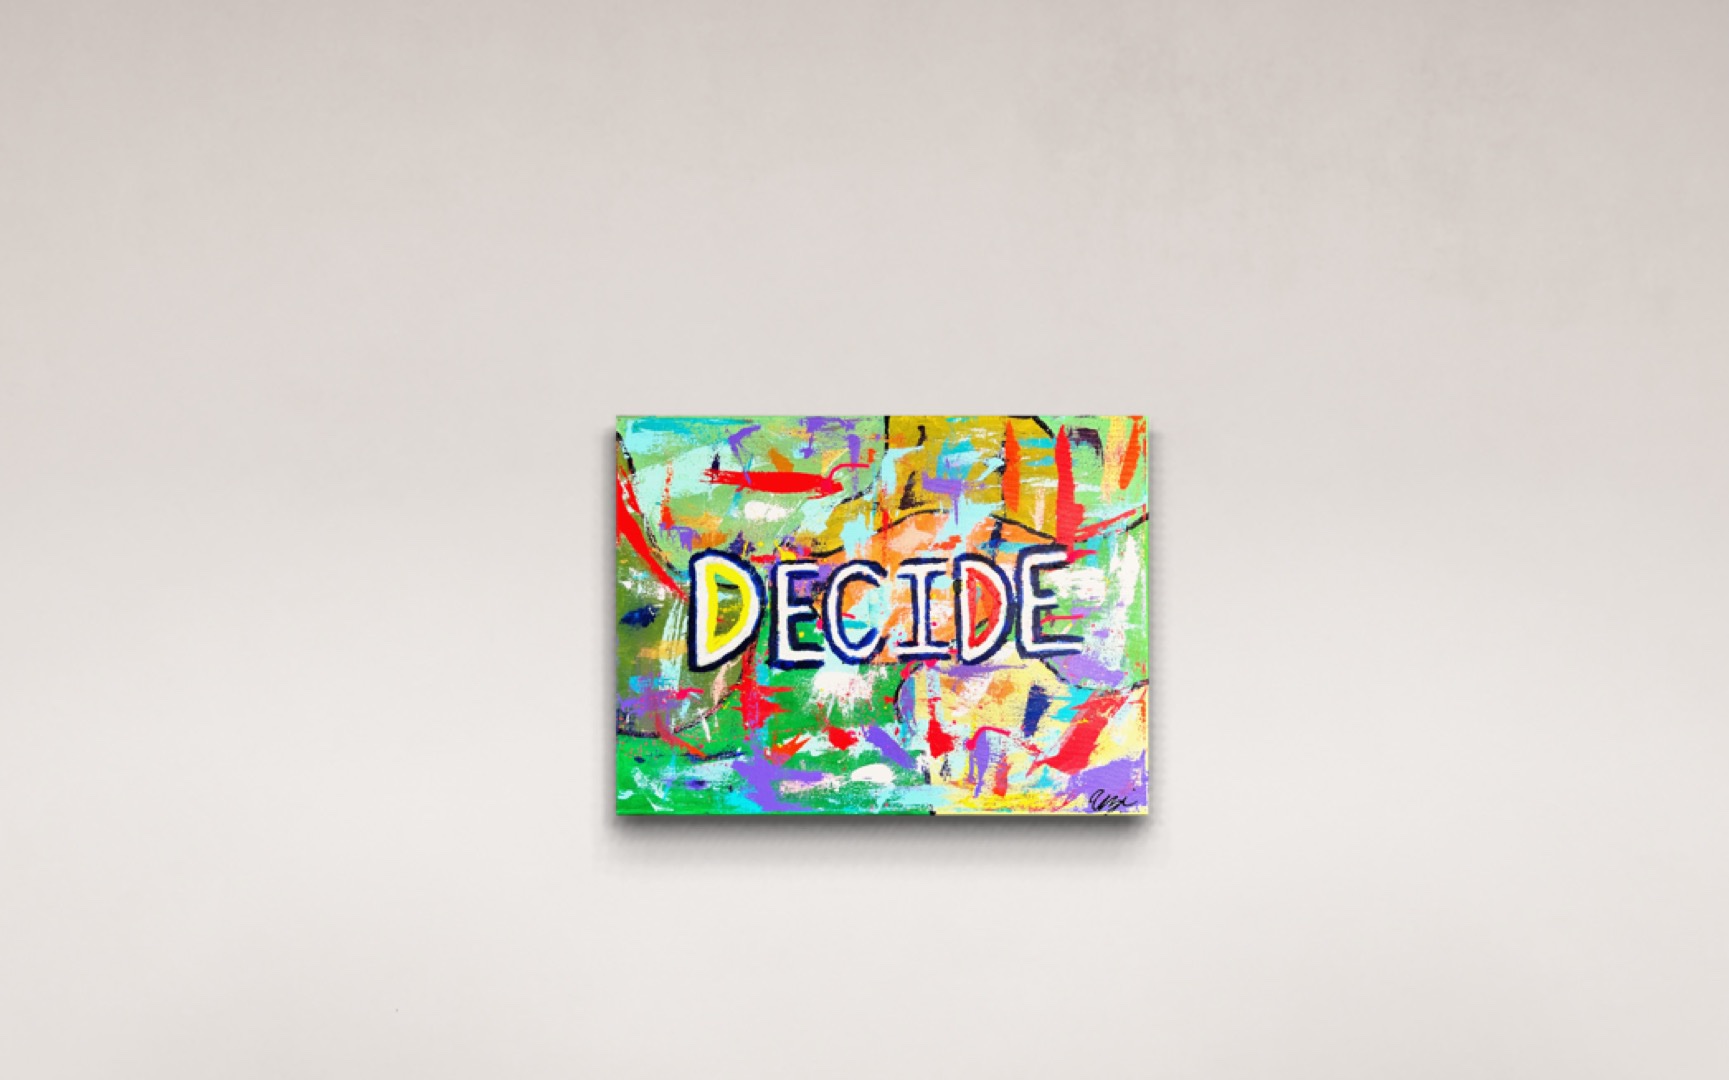 Decide acrylic paint with oil stick canvas for sale by Uzoma Obasi